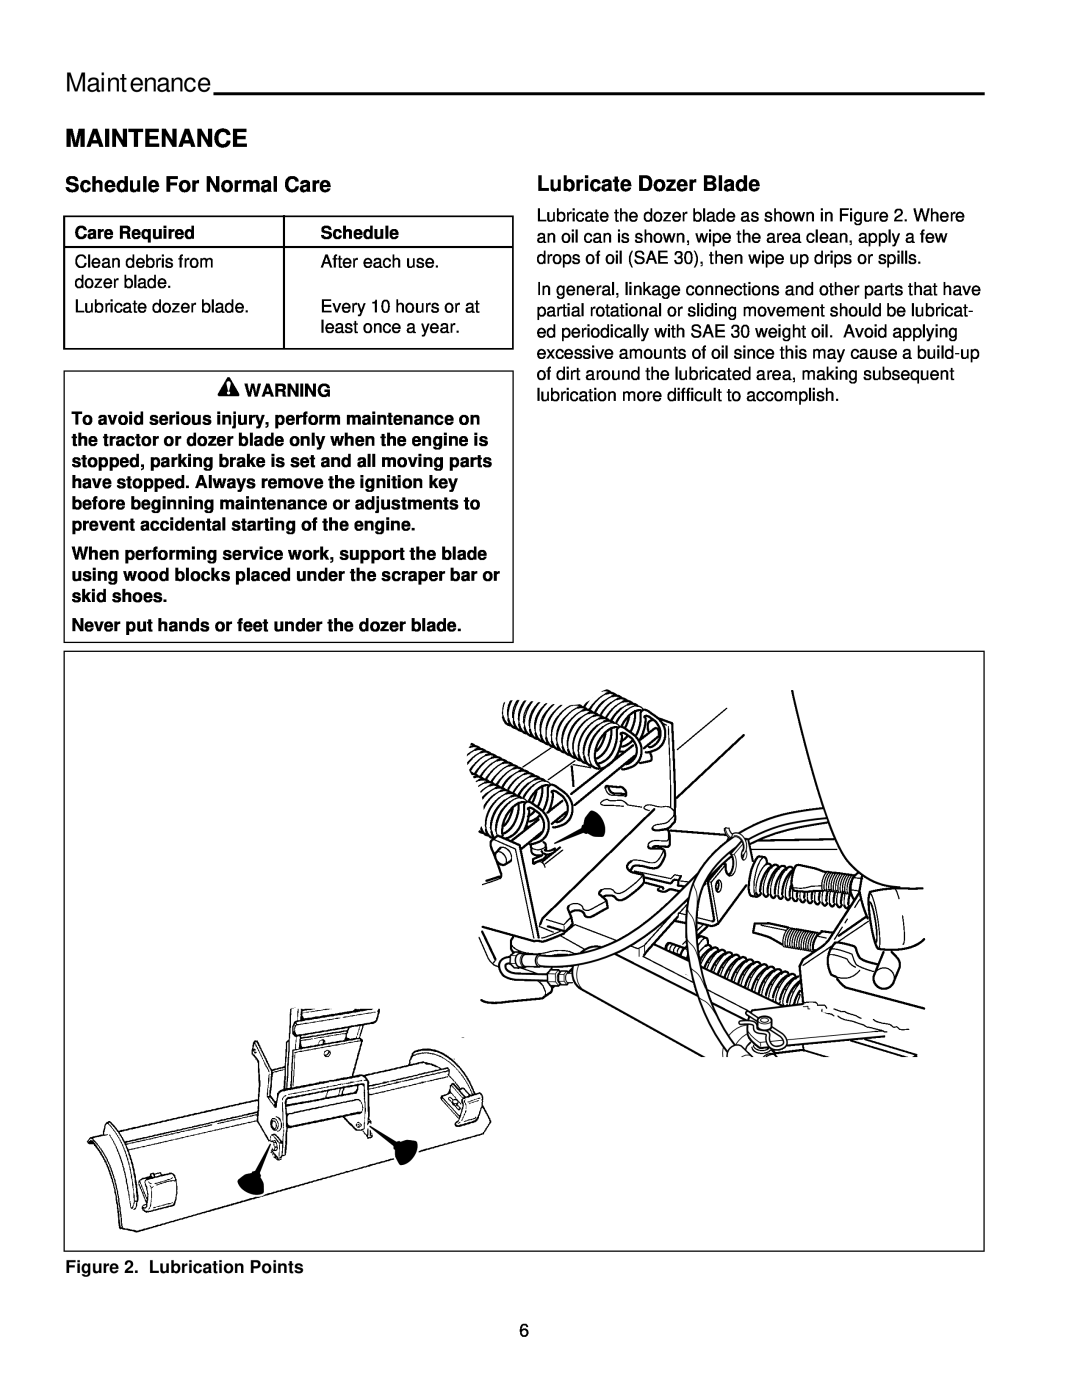 Snapper 2137 manual Maintenance, Schedule For Normal Care, Lubricate Dozer Blade 